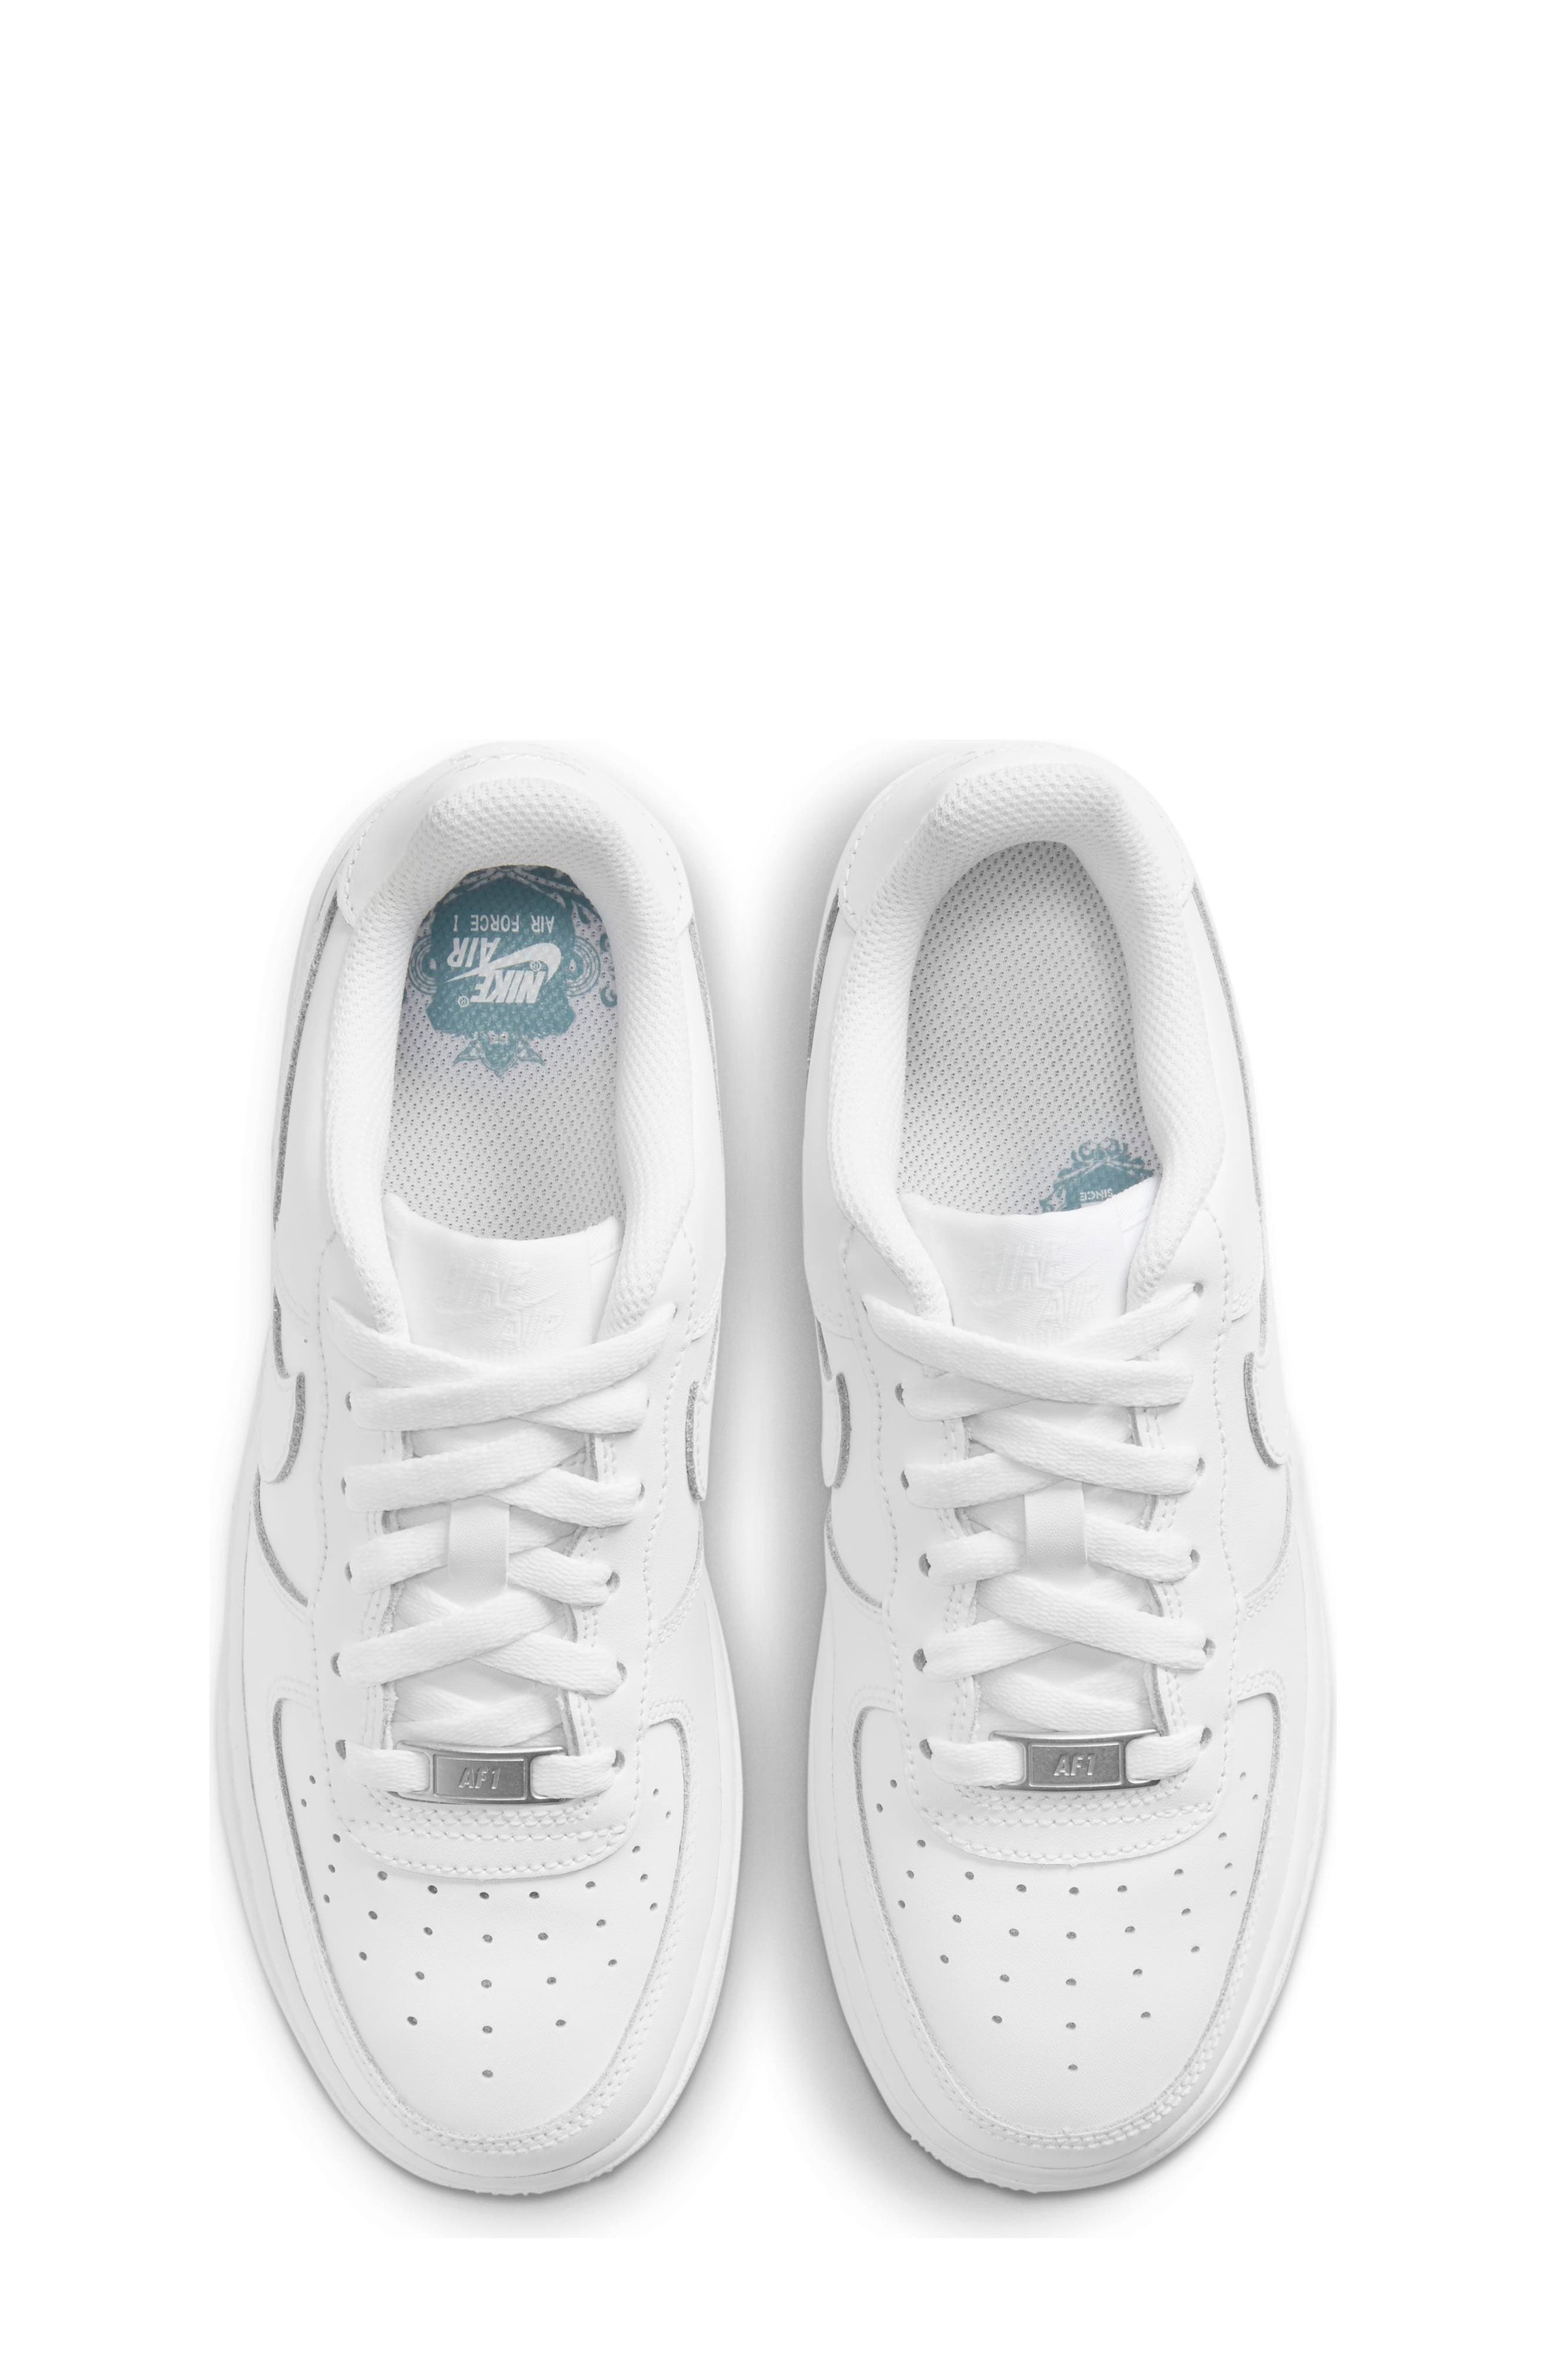 white air force 1 low tops